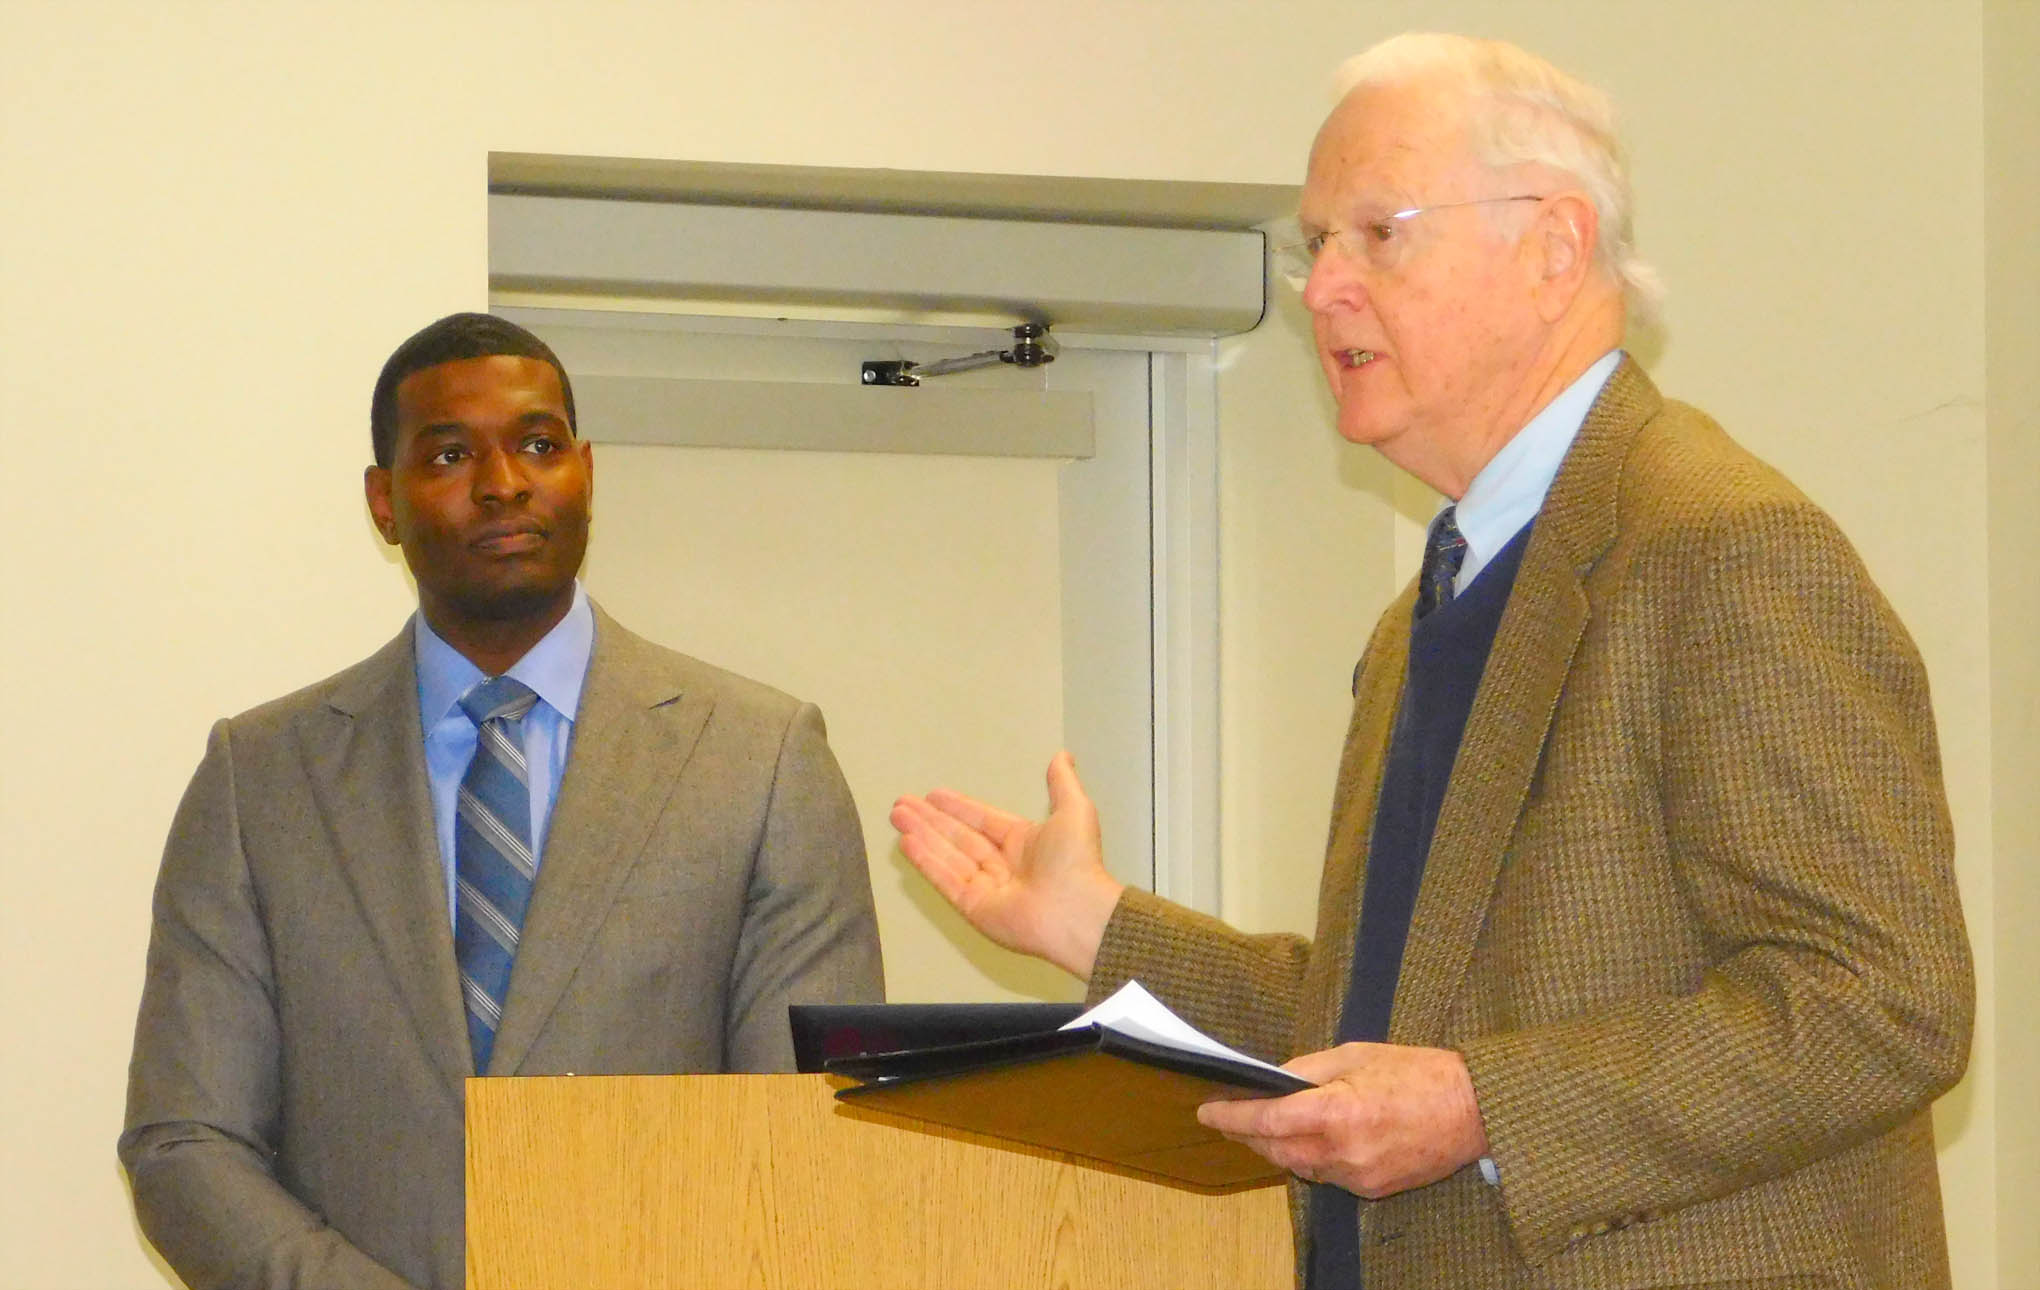 N.C. official speaks about environment at CCCC program